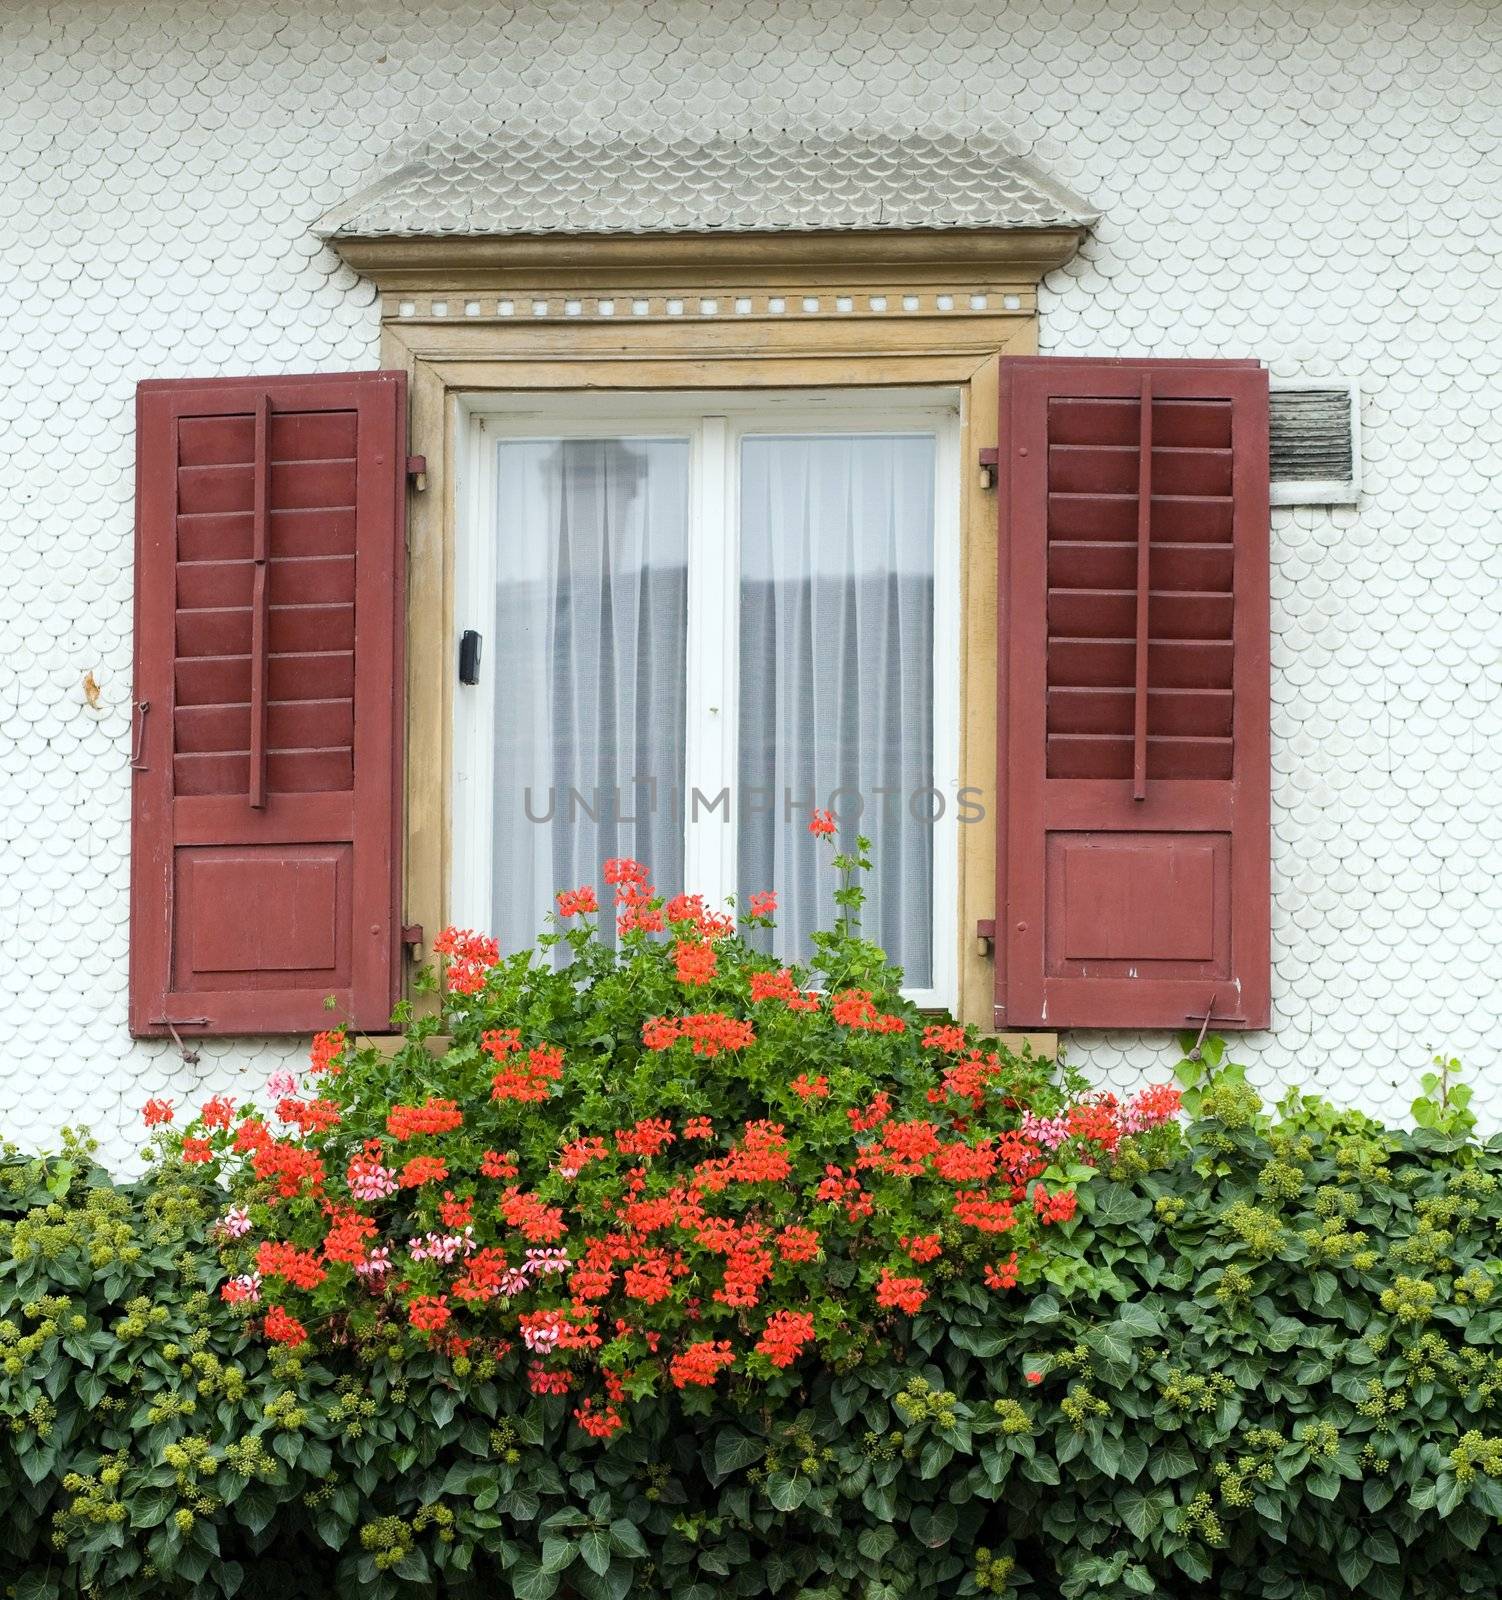 An image of a window and a bunch of flowers